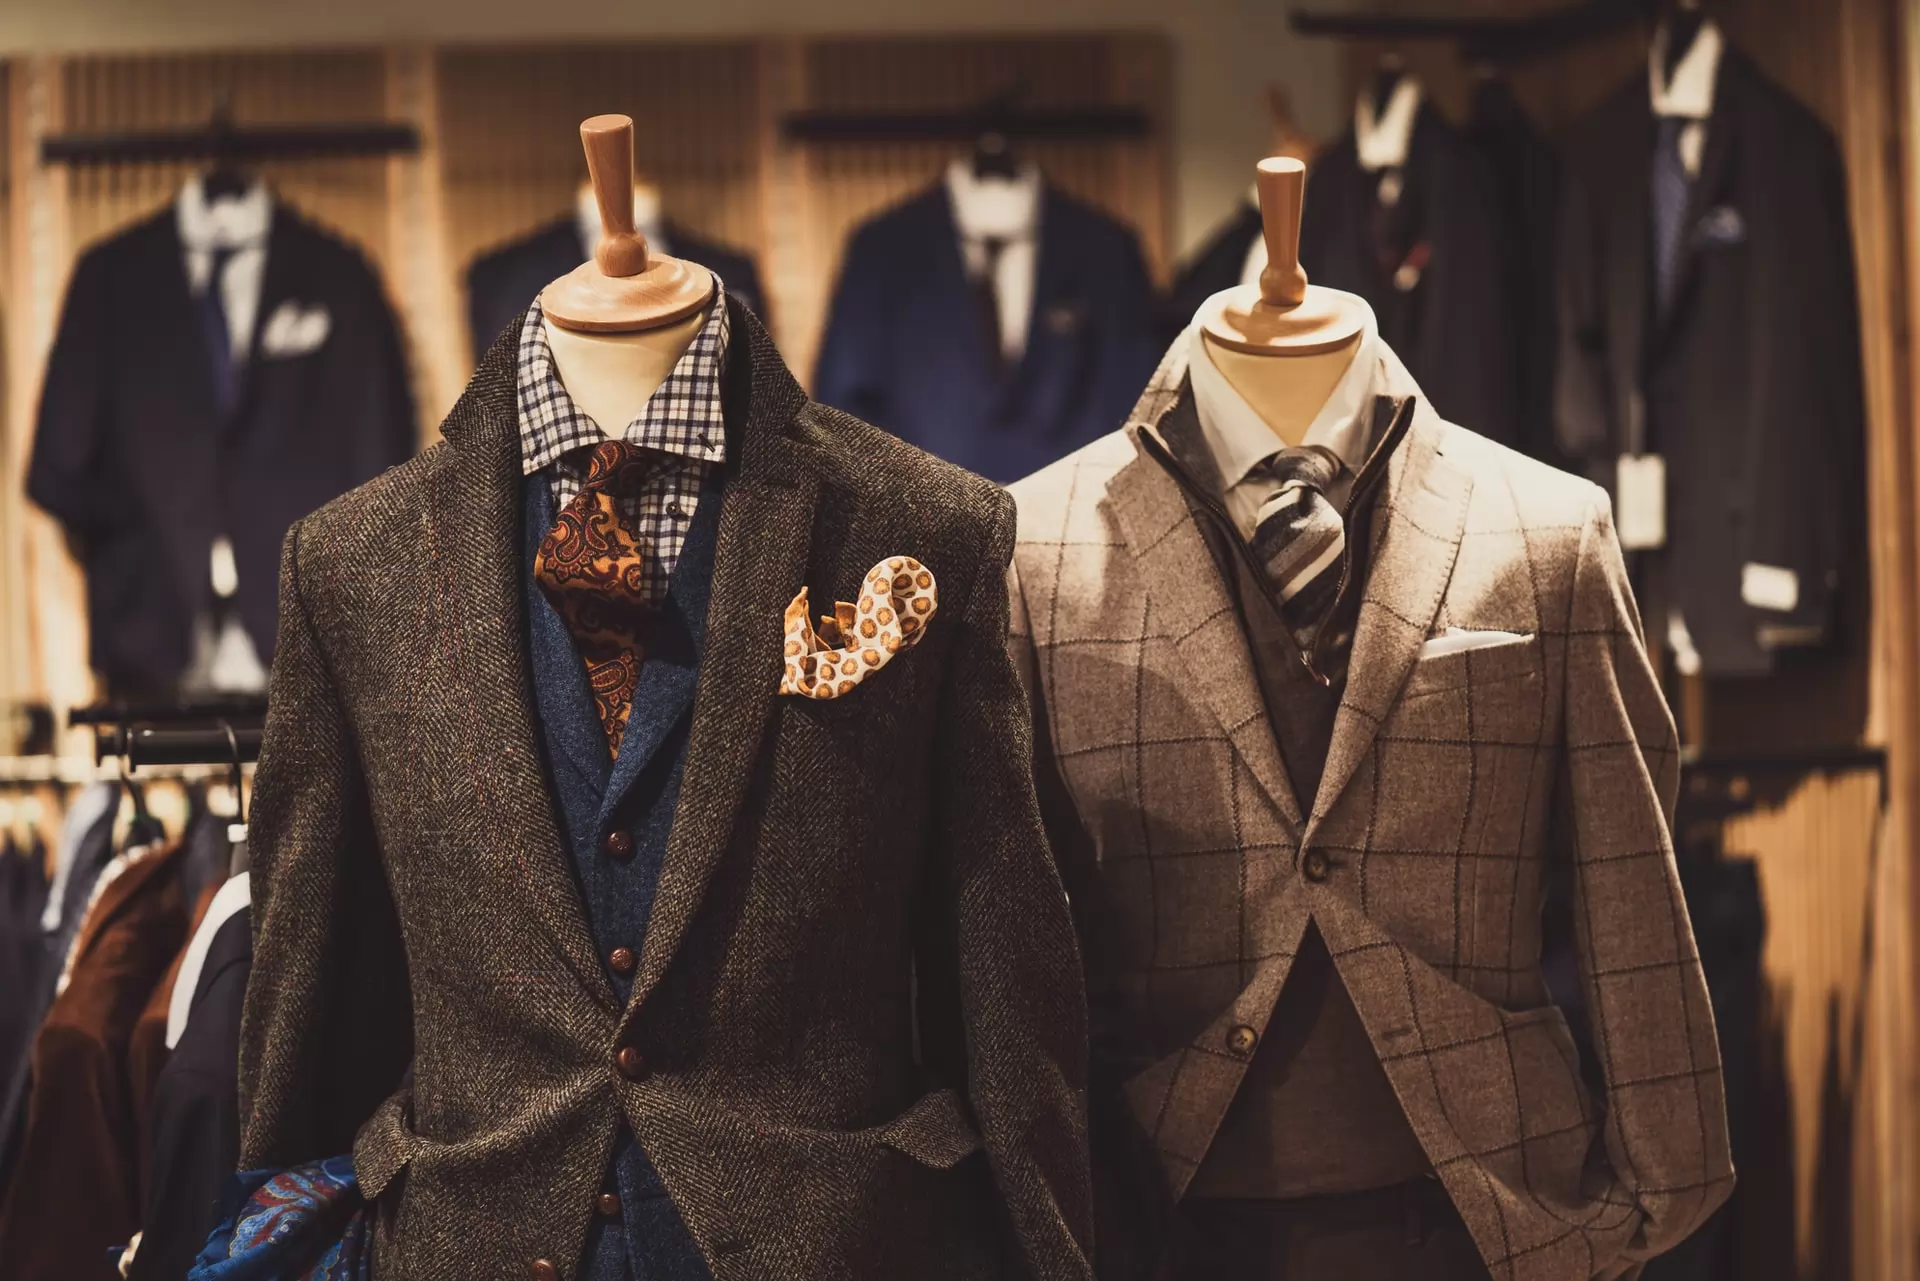 the market for made-to-measure suits